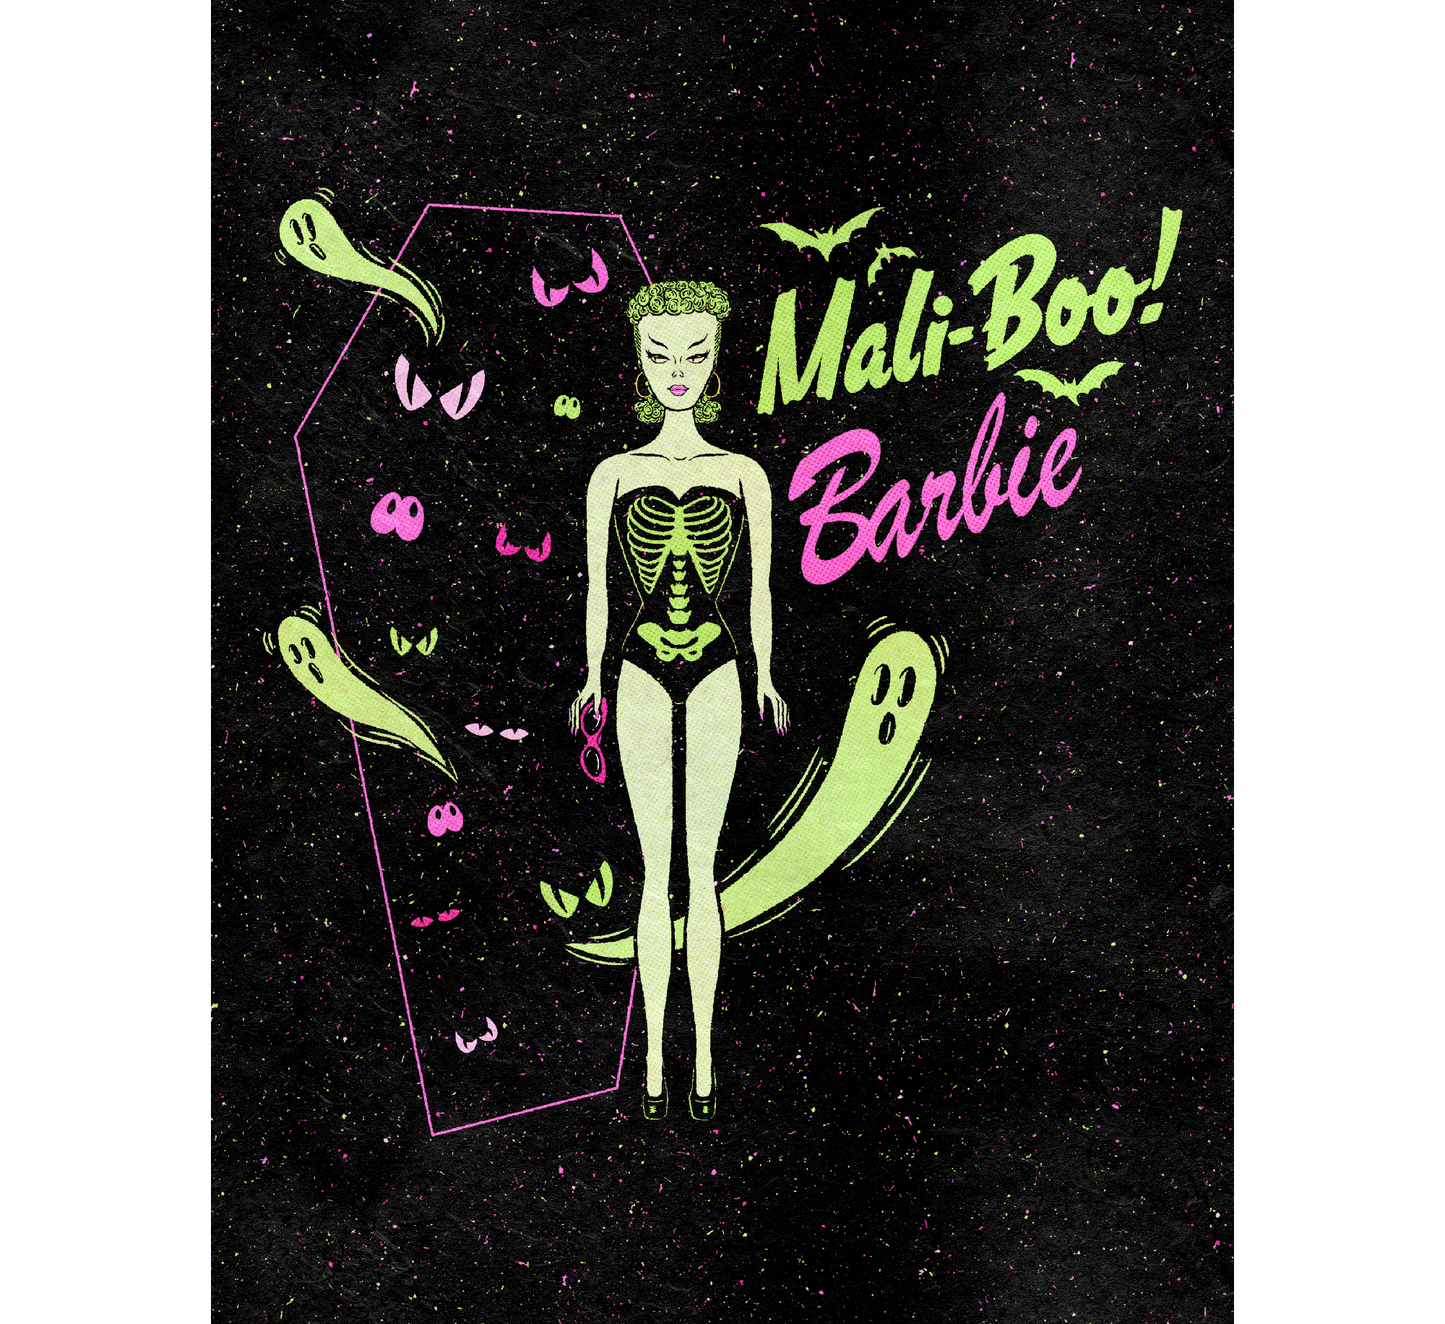 Mali-BOO! Barbie Art Print *Limited Edition Pearlescent Variant*